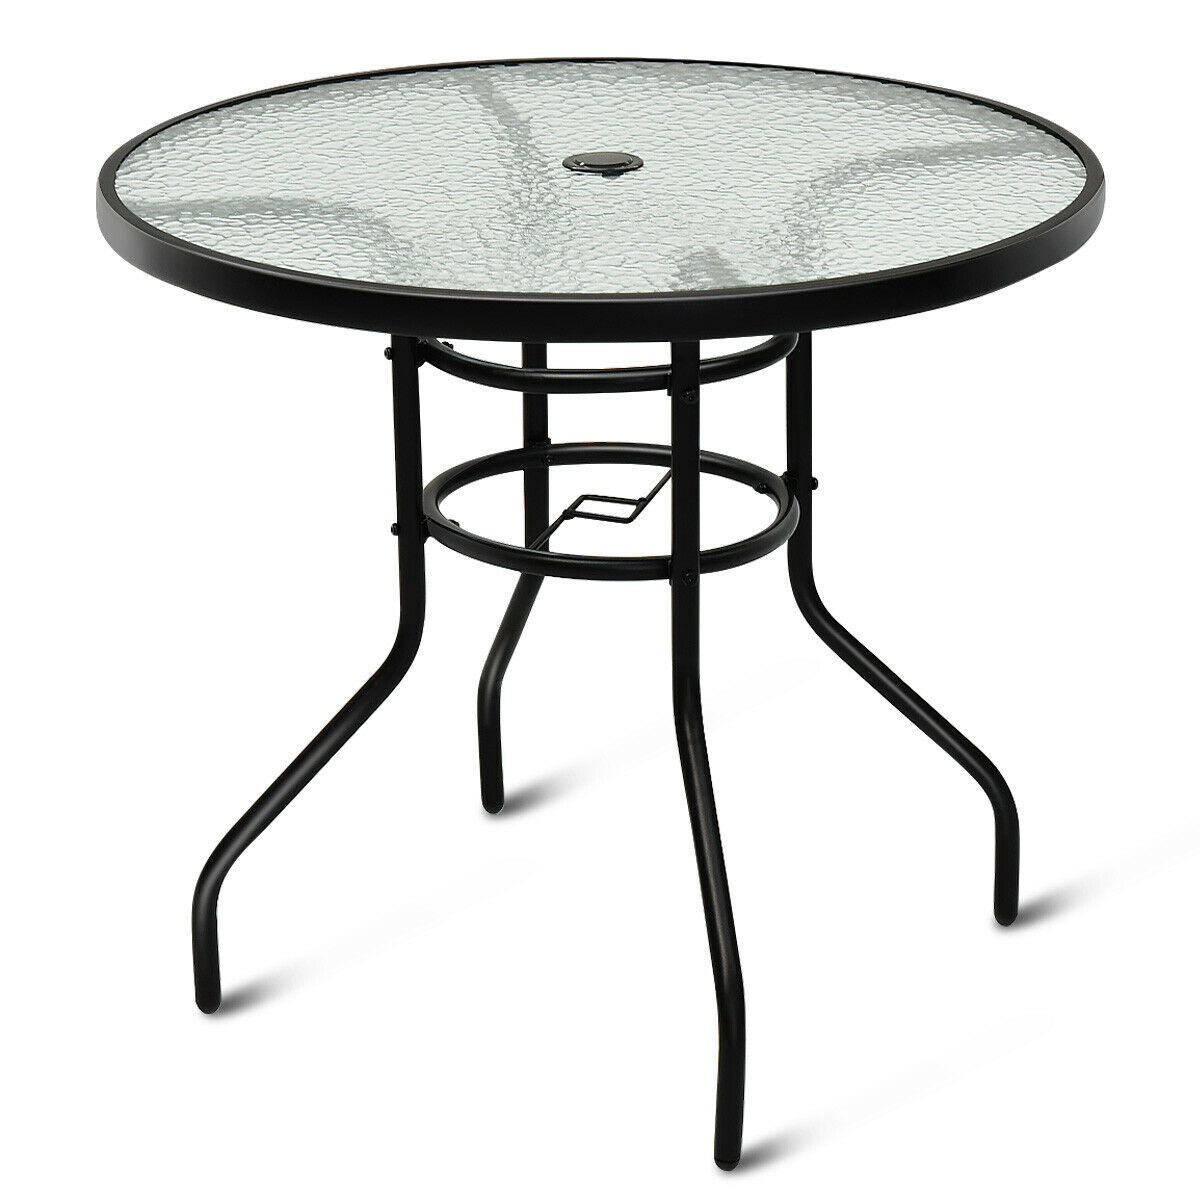 Costway 32'' Patio Round Table Tempered Glass Steel Frame Outdoor Pool Yard Garden - image 3 of 8